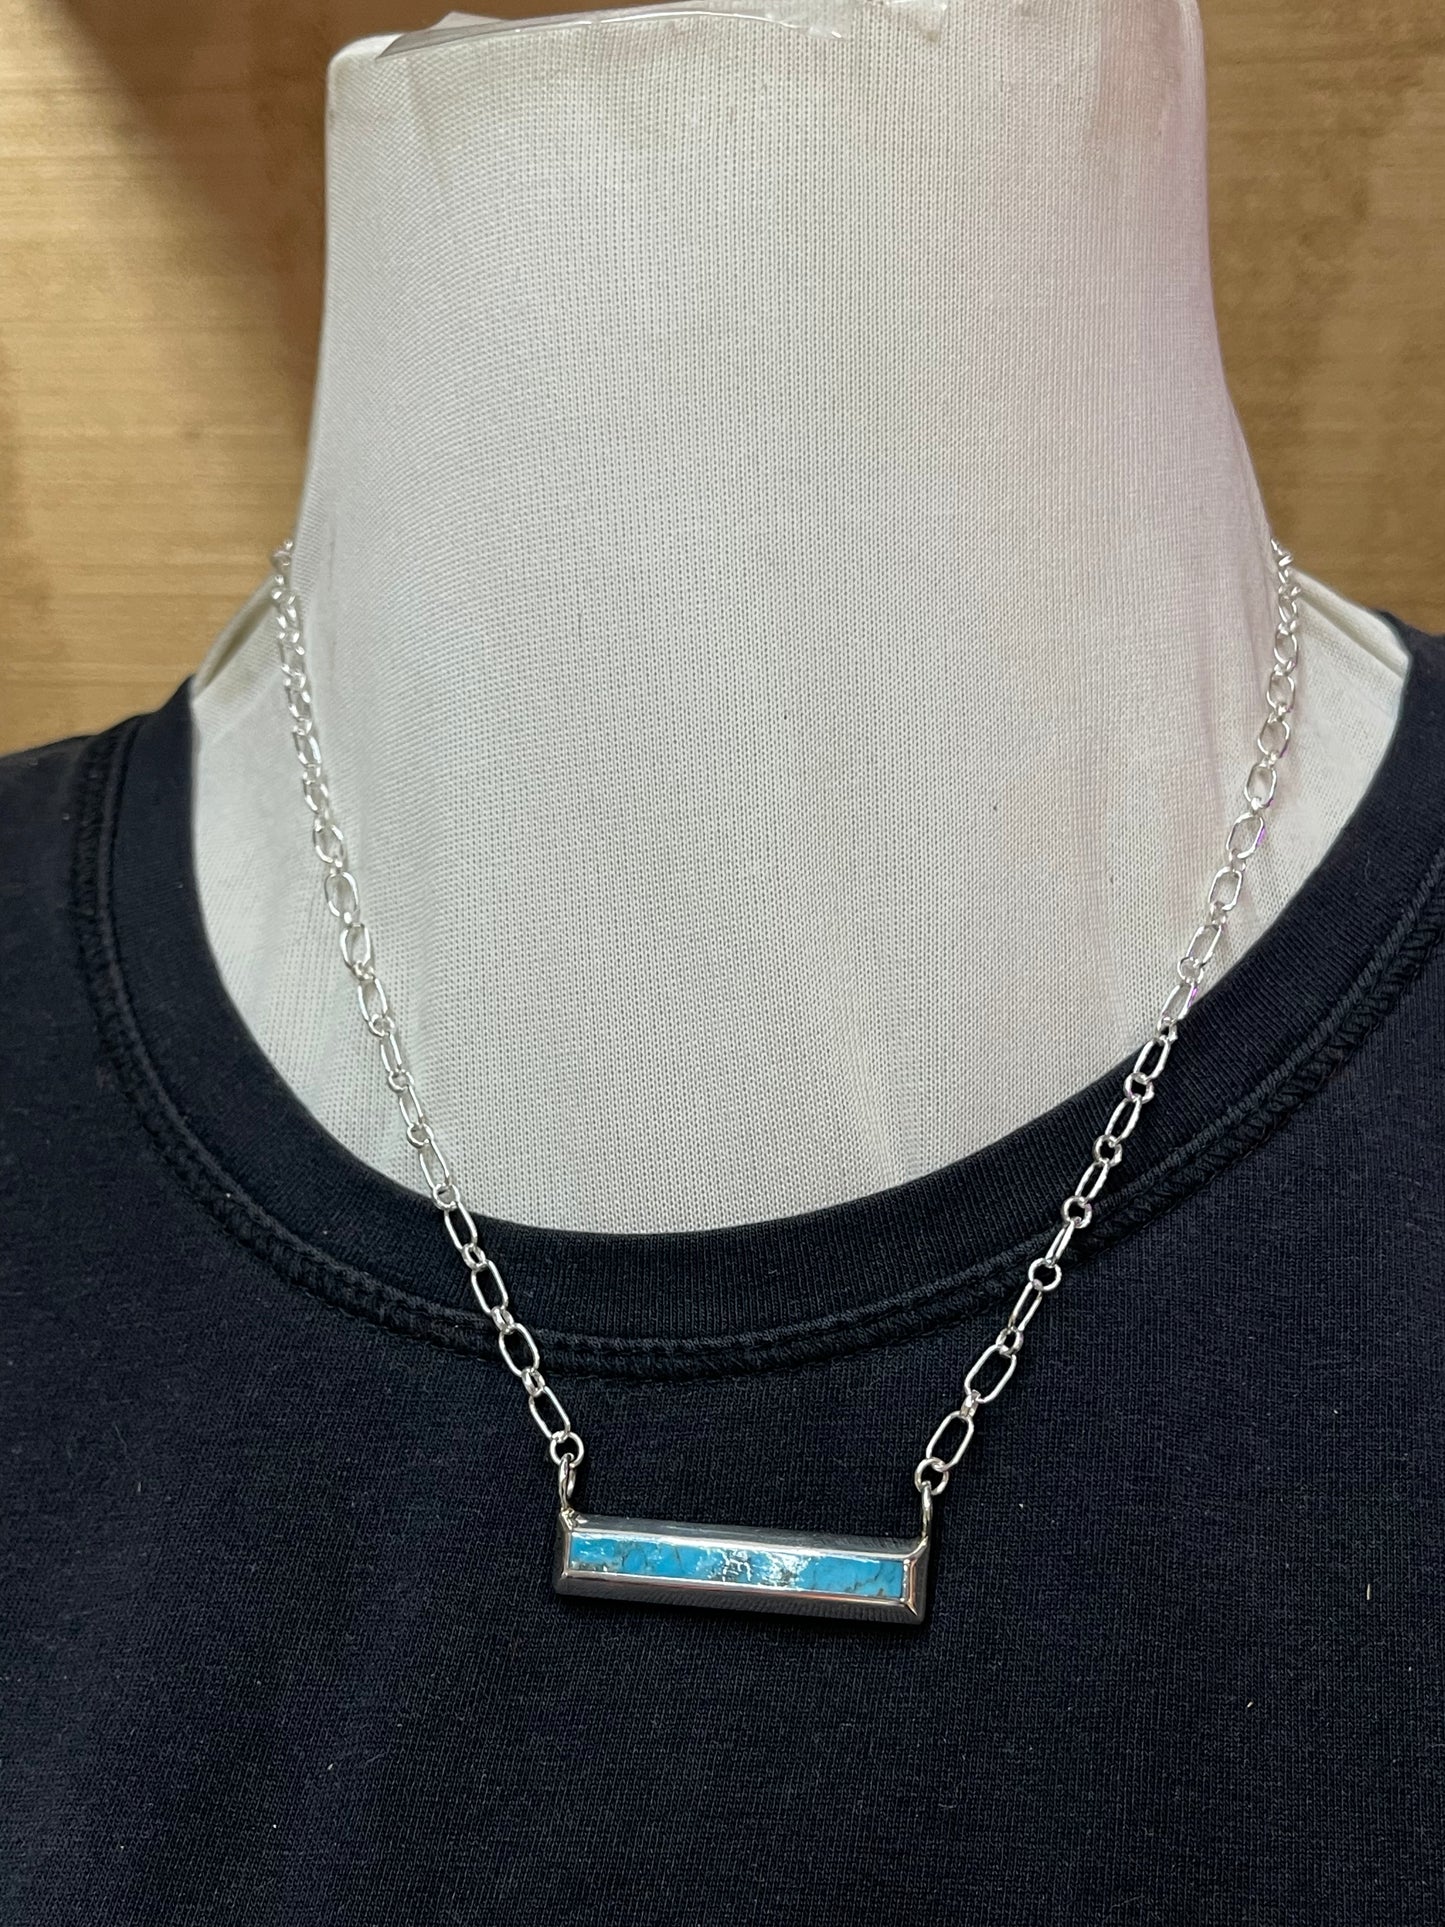 18" Turquoise Inlay Bar Necklace by Troy Natachu, Zuni